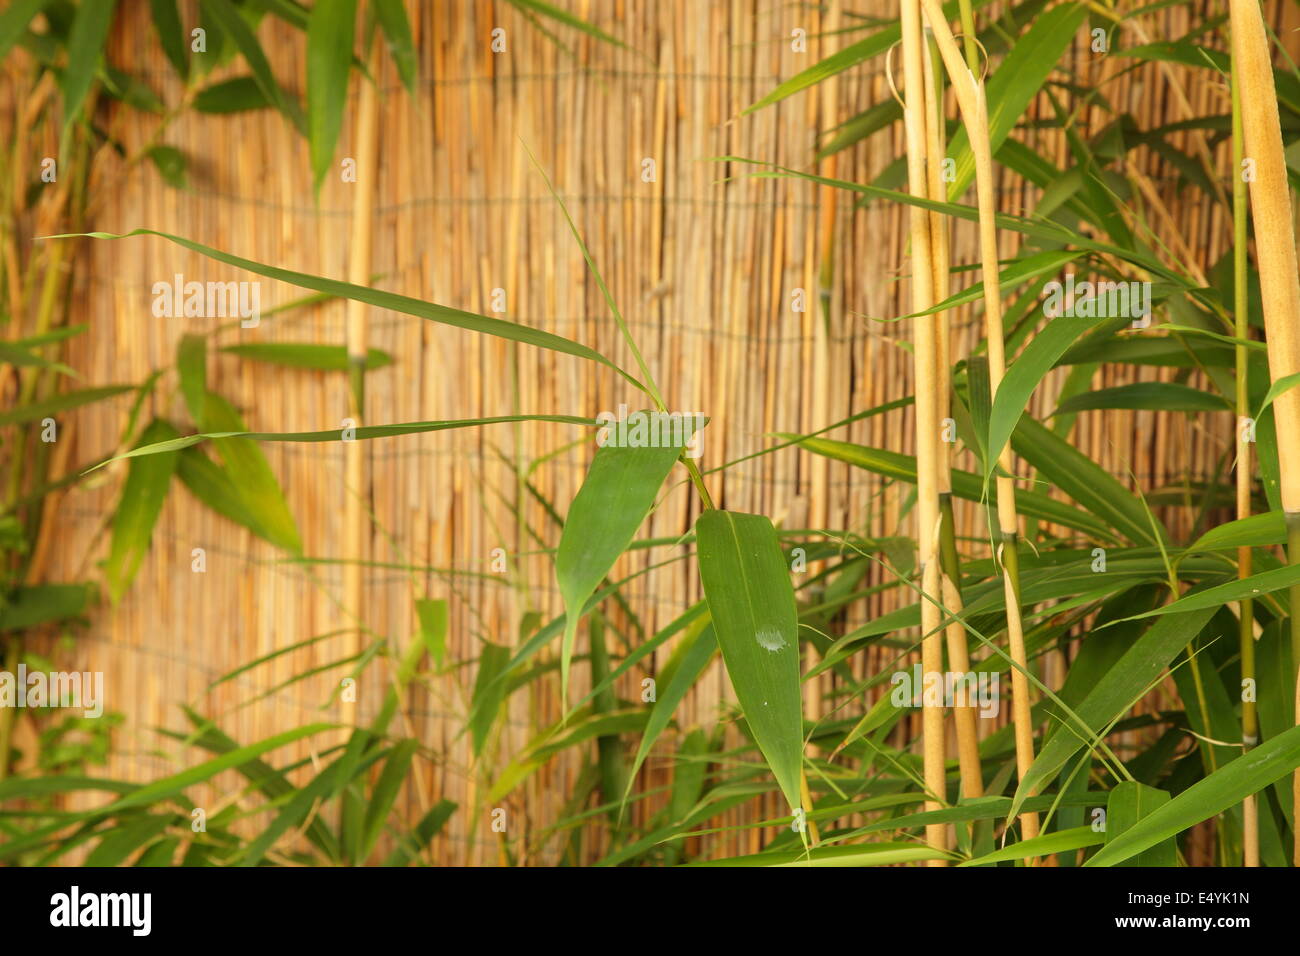 Bamboo fence with fresh bamboo Stock Photo